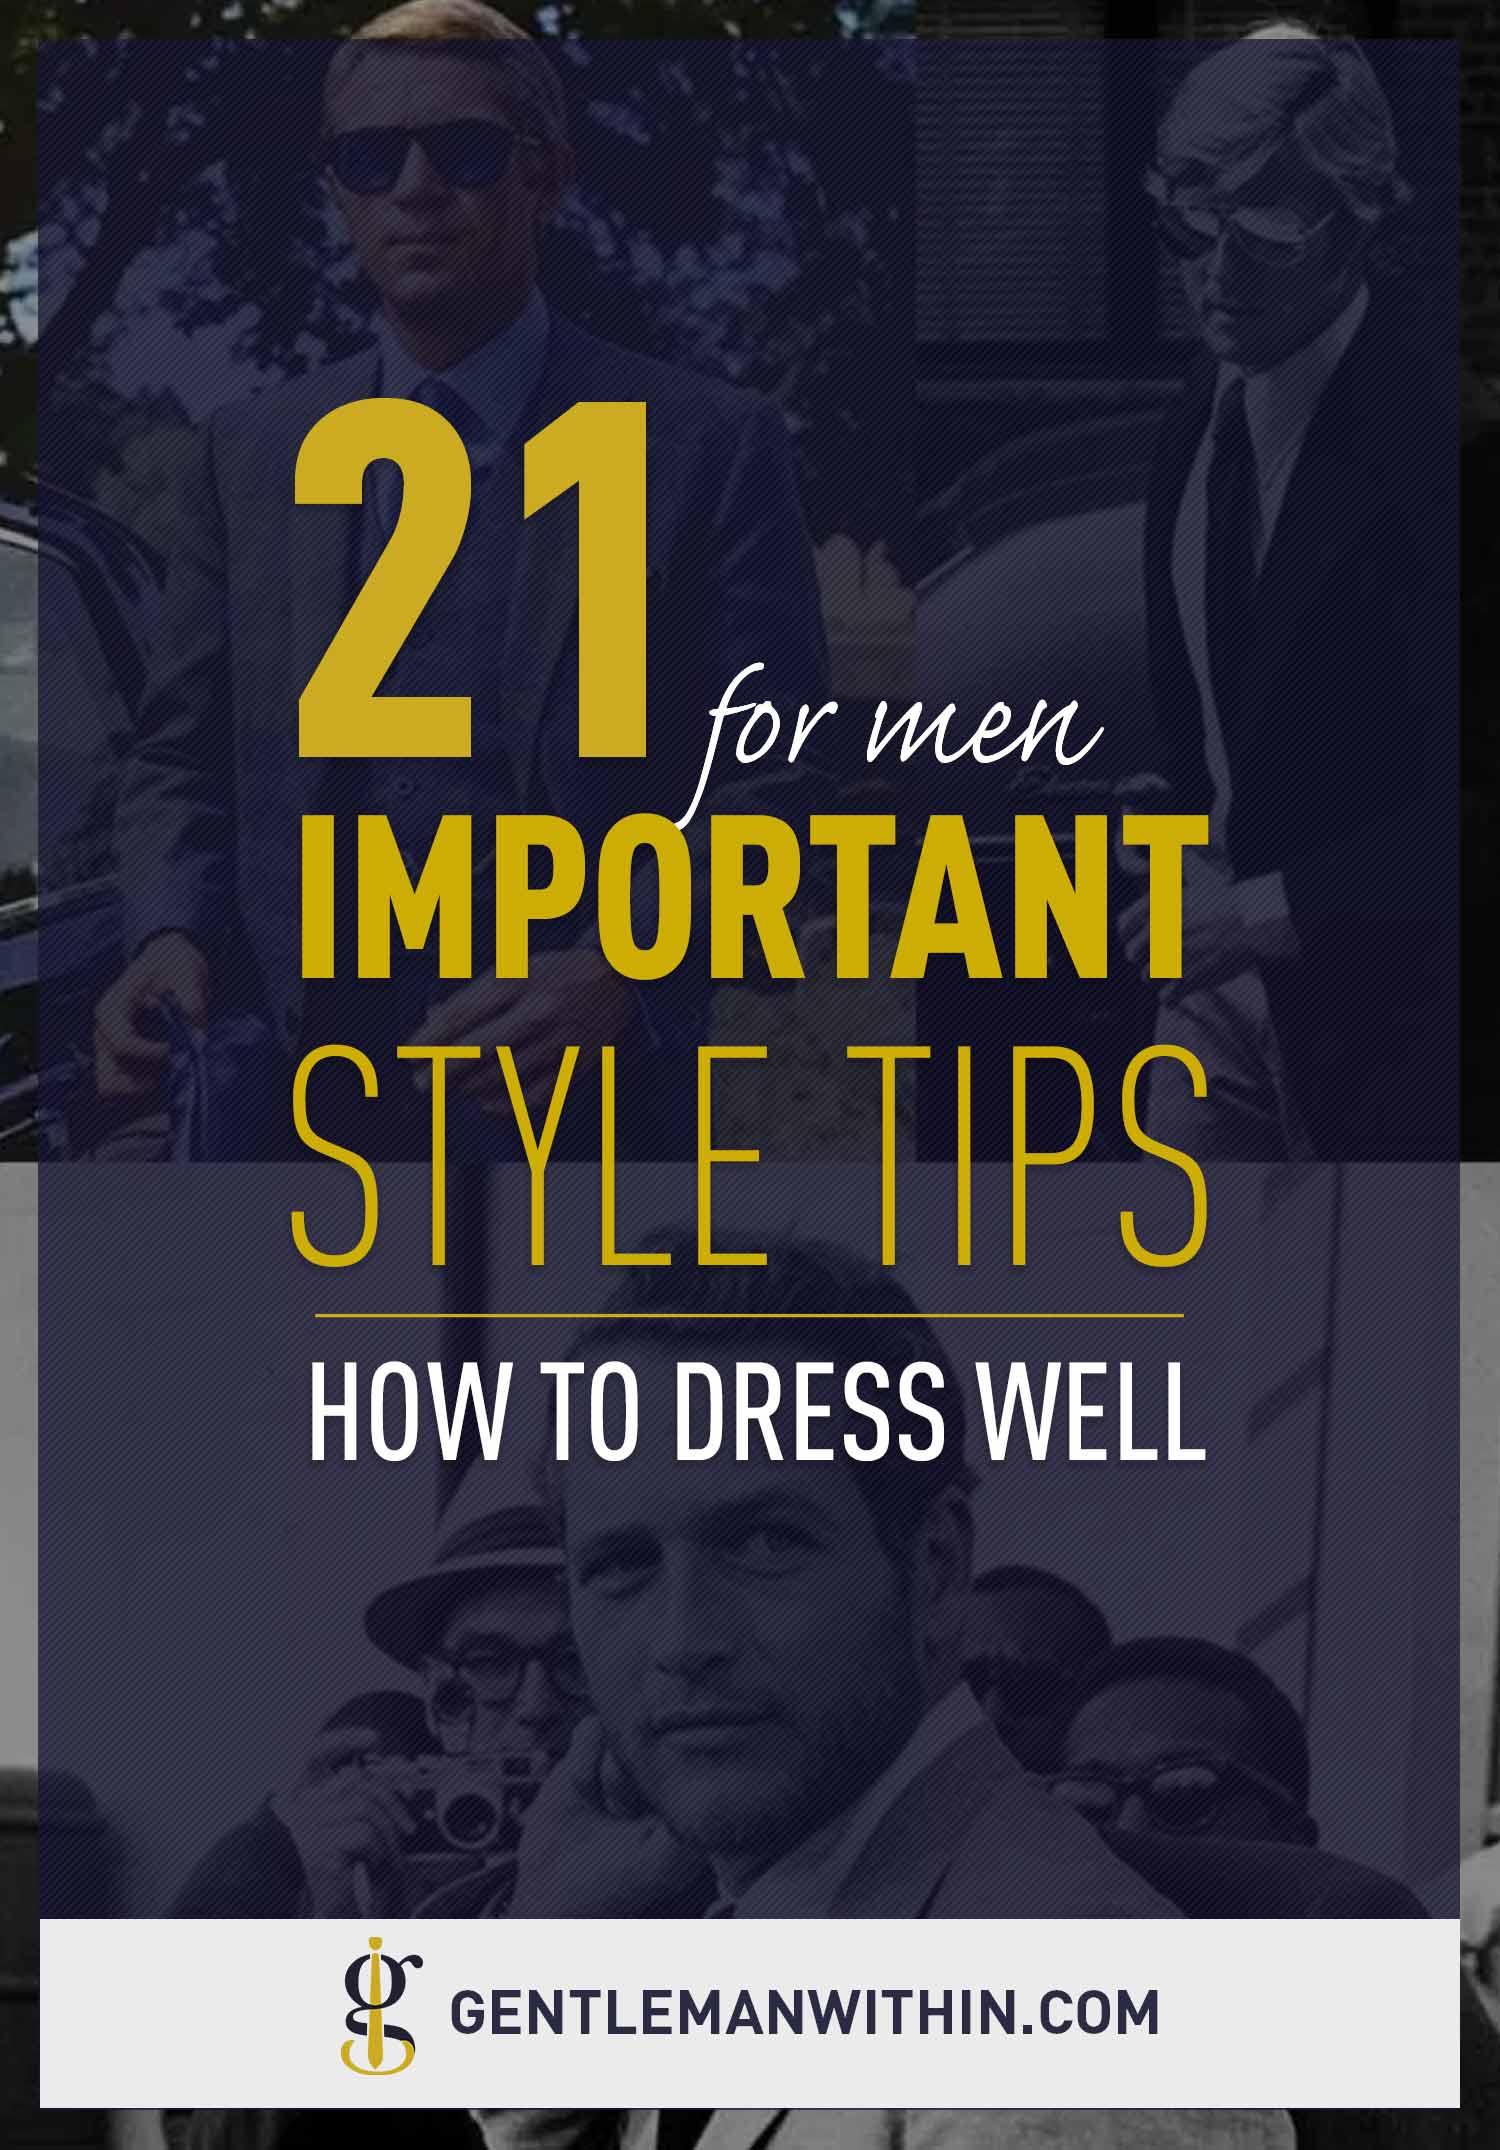 How To Dress Well: 21 Important Style Tips On Dressing Better As Men | GENTLEMAN WITHIN